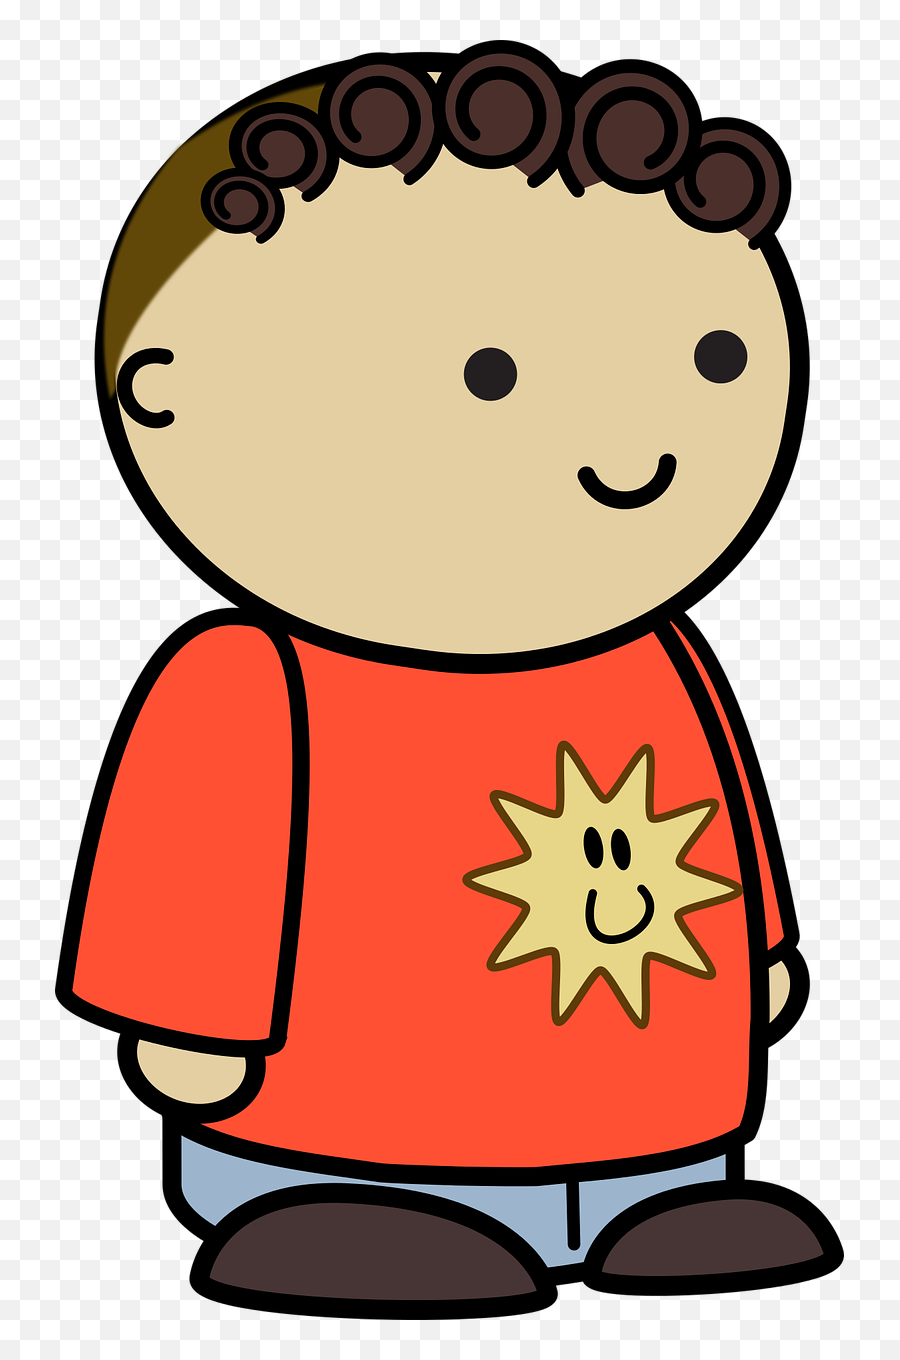 Curly Haired Boy In A Orange Shirt Sad - Angry Comic Characters Emoji,Sad Face Clipart